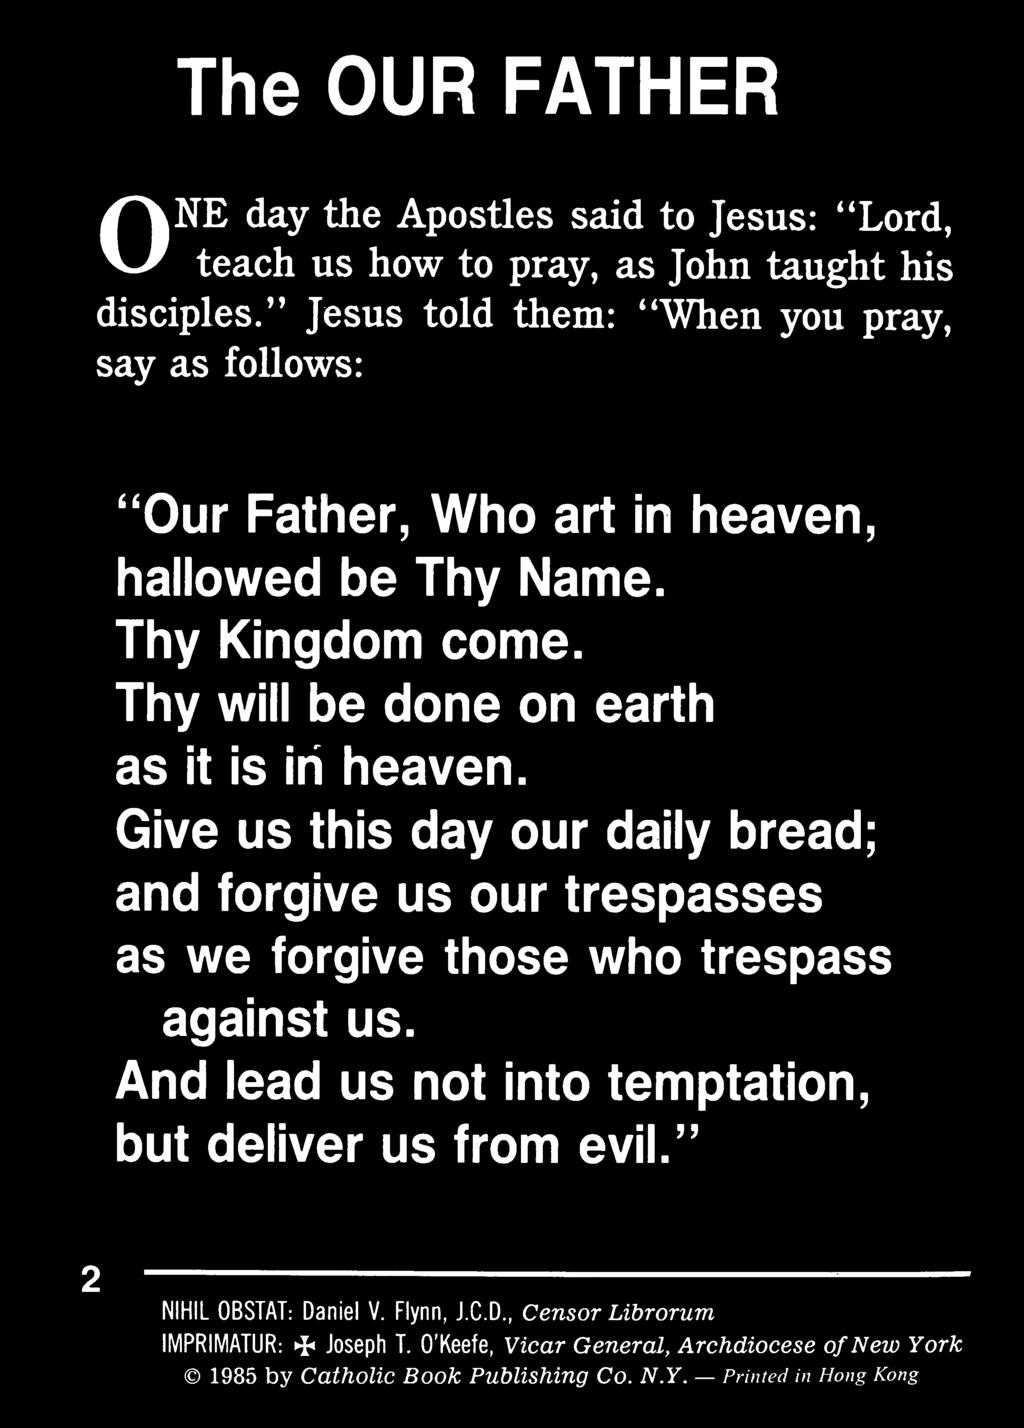 Thy will be done on earth as it is in heaven. Give us this day our daily bread; and forgive us our trespasses as we forgive those who trespass against us.